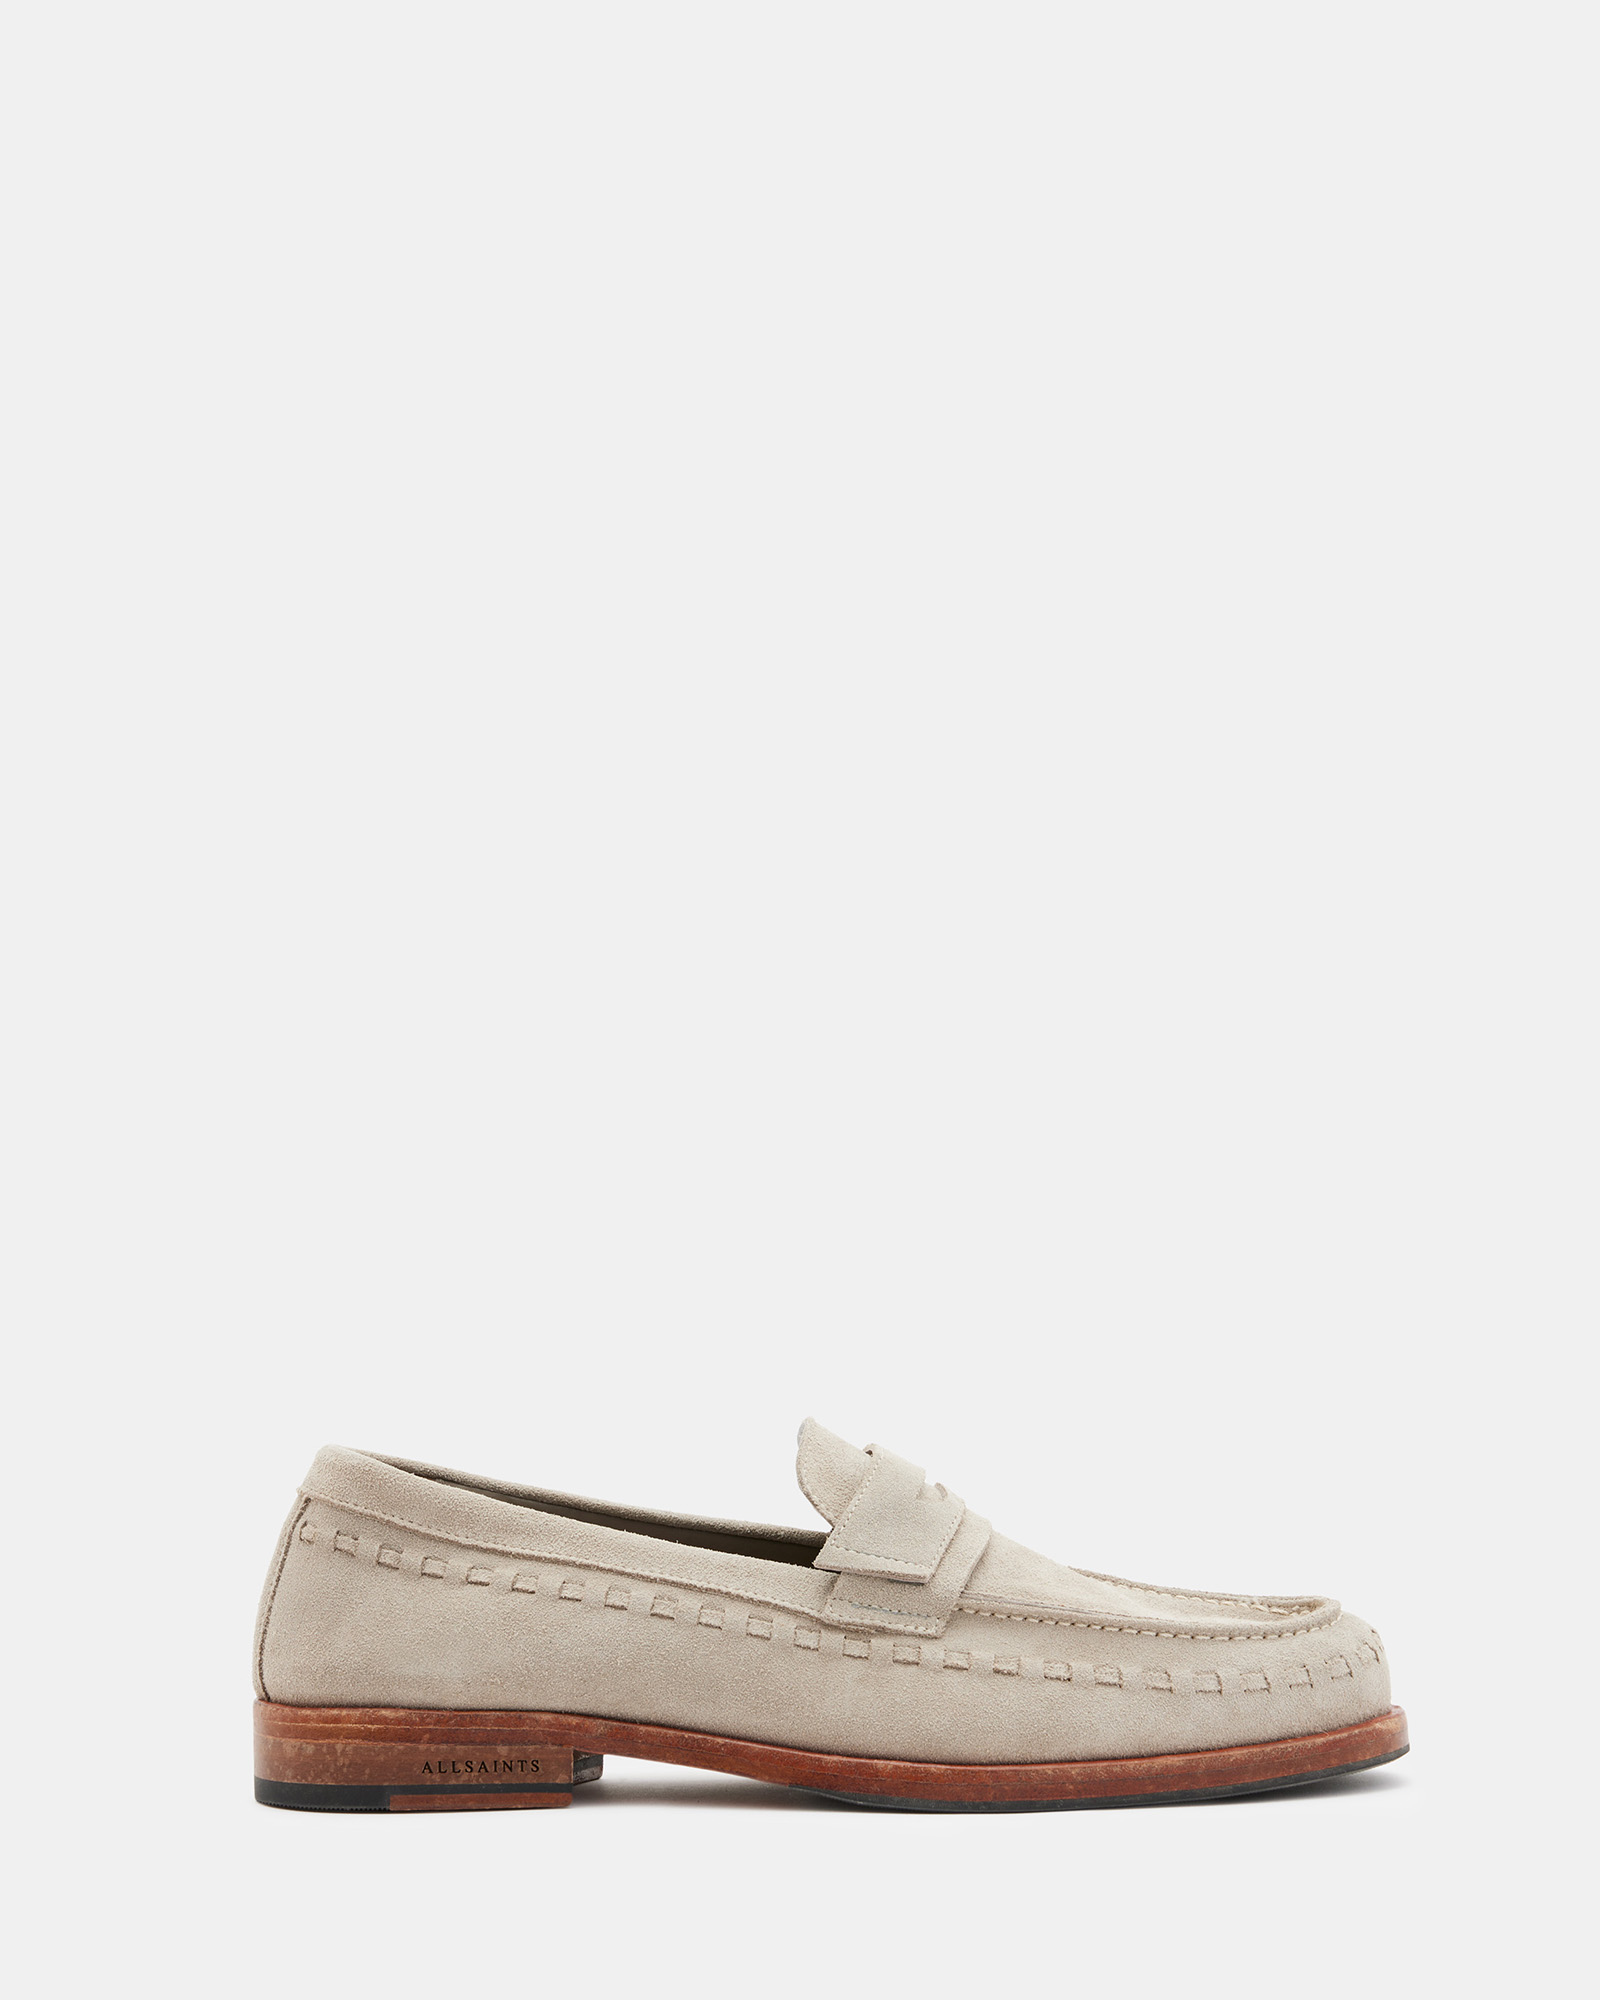 Allsaints Sammy Leather Loafer Shoes In Sand